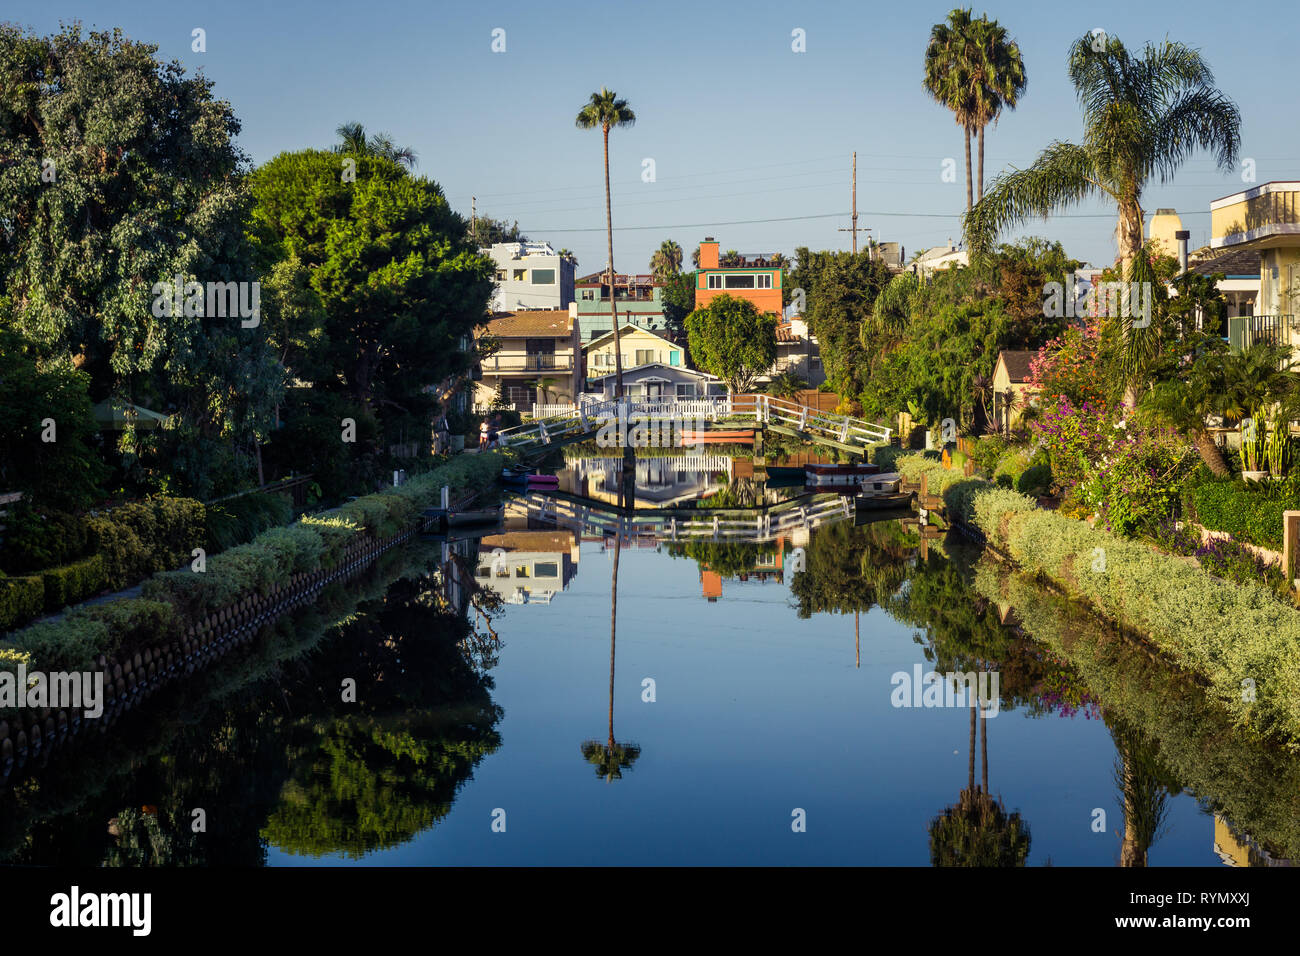 The residential part of Venice in Los Angeles - the Venice Canals Stock Photo